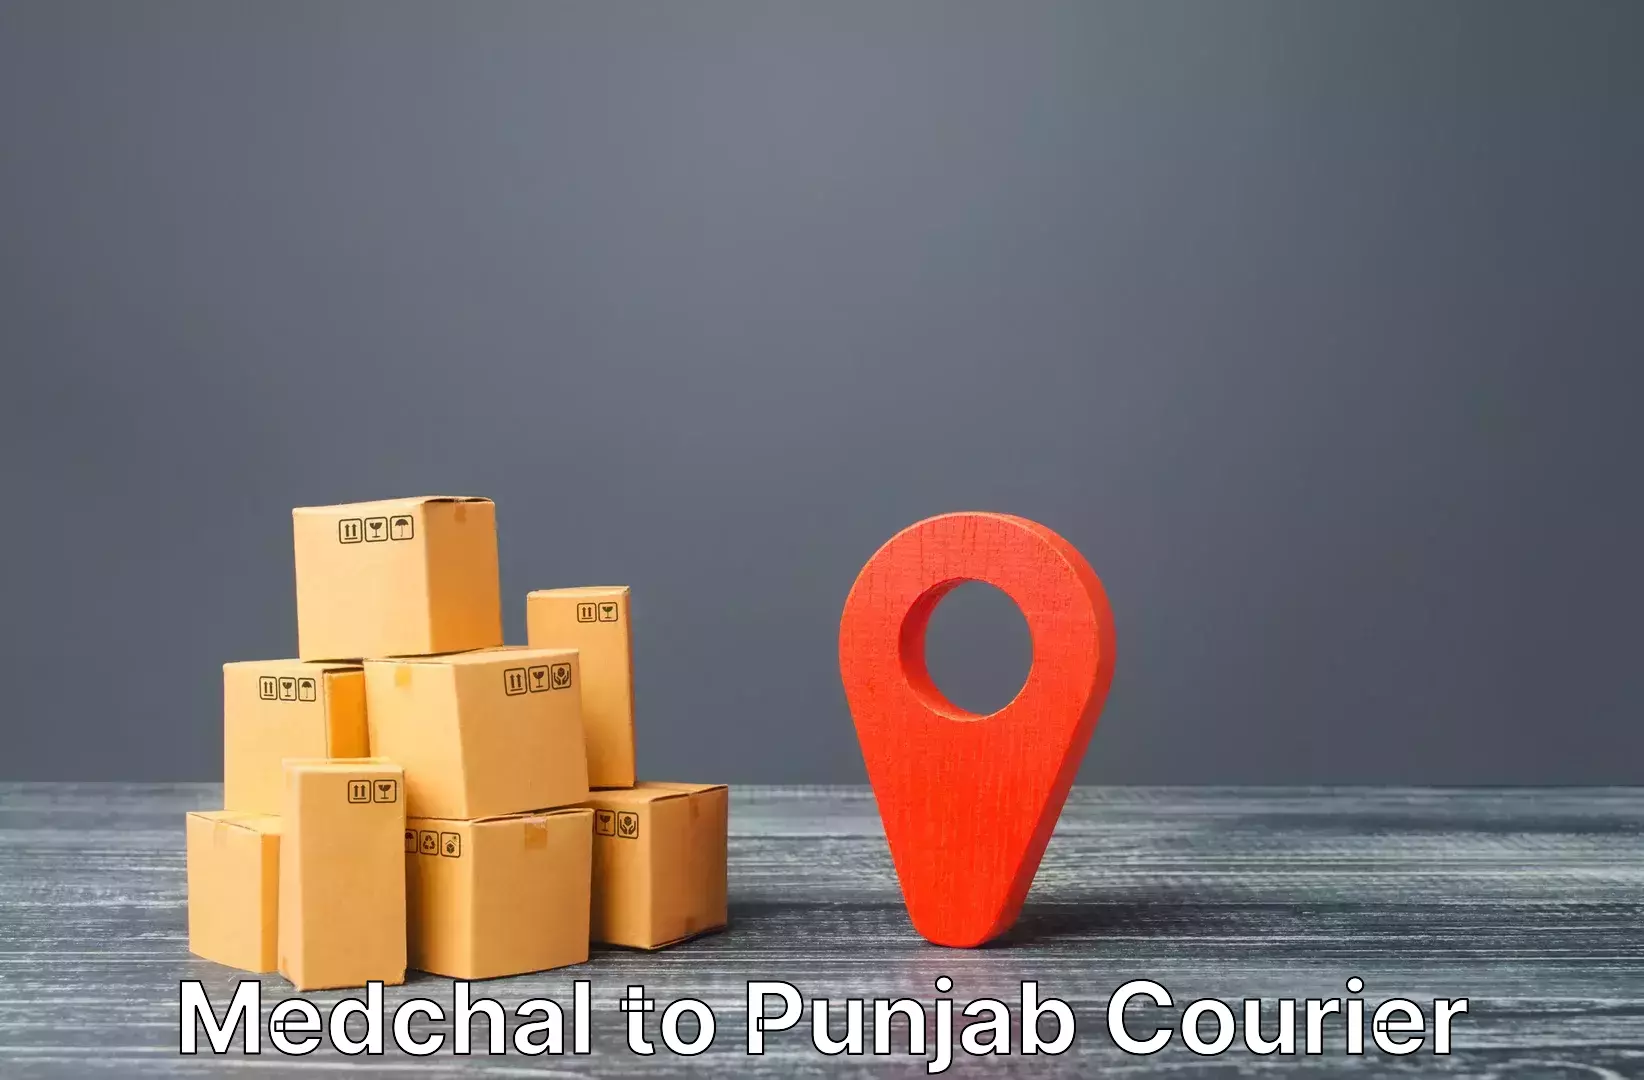 Luggage delivery logistics Medchal to Mohali